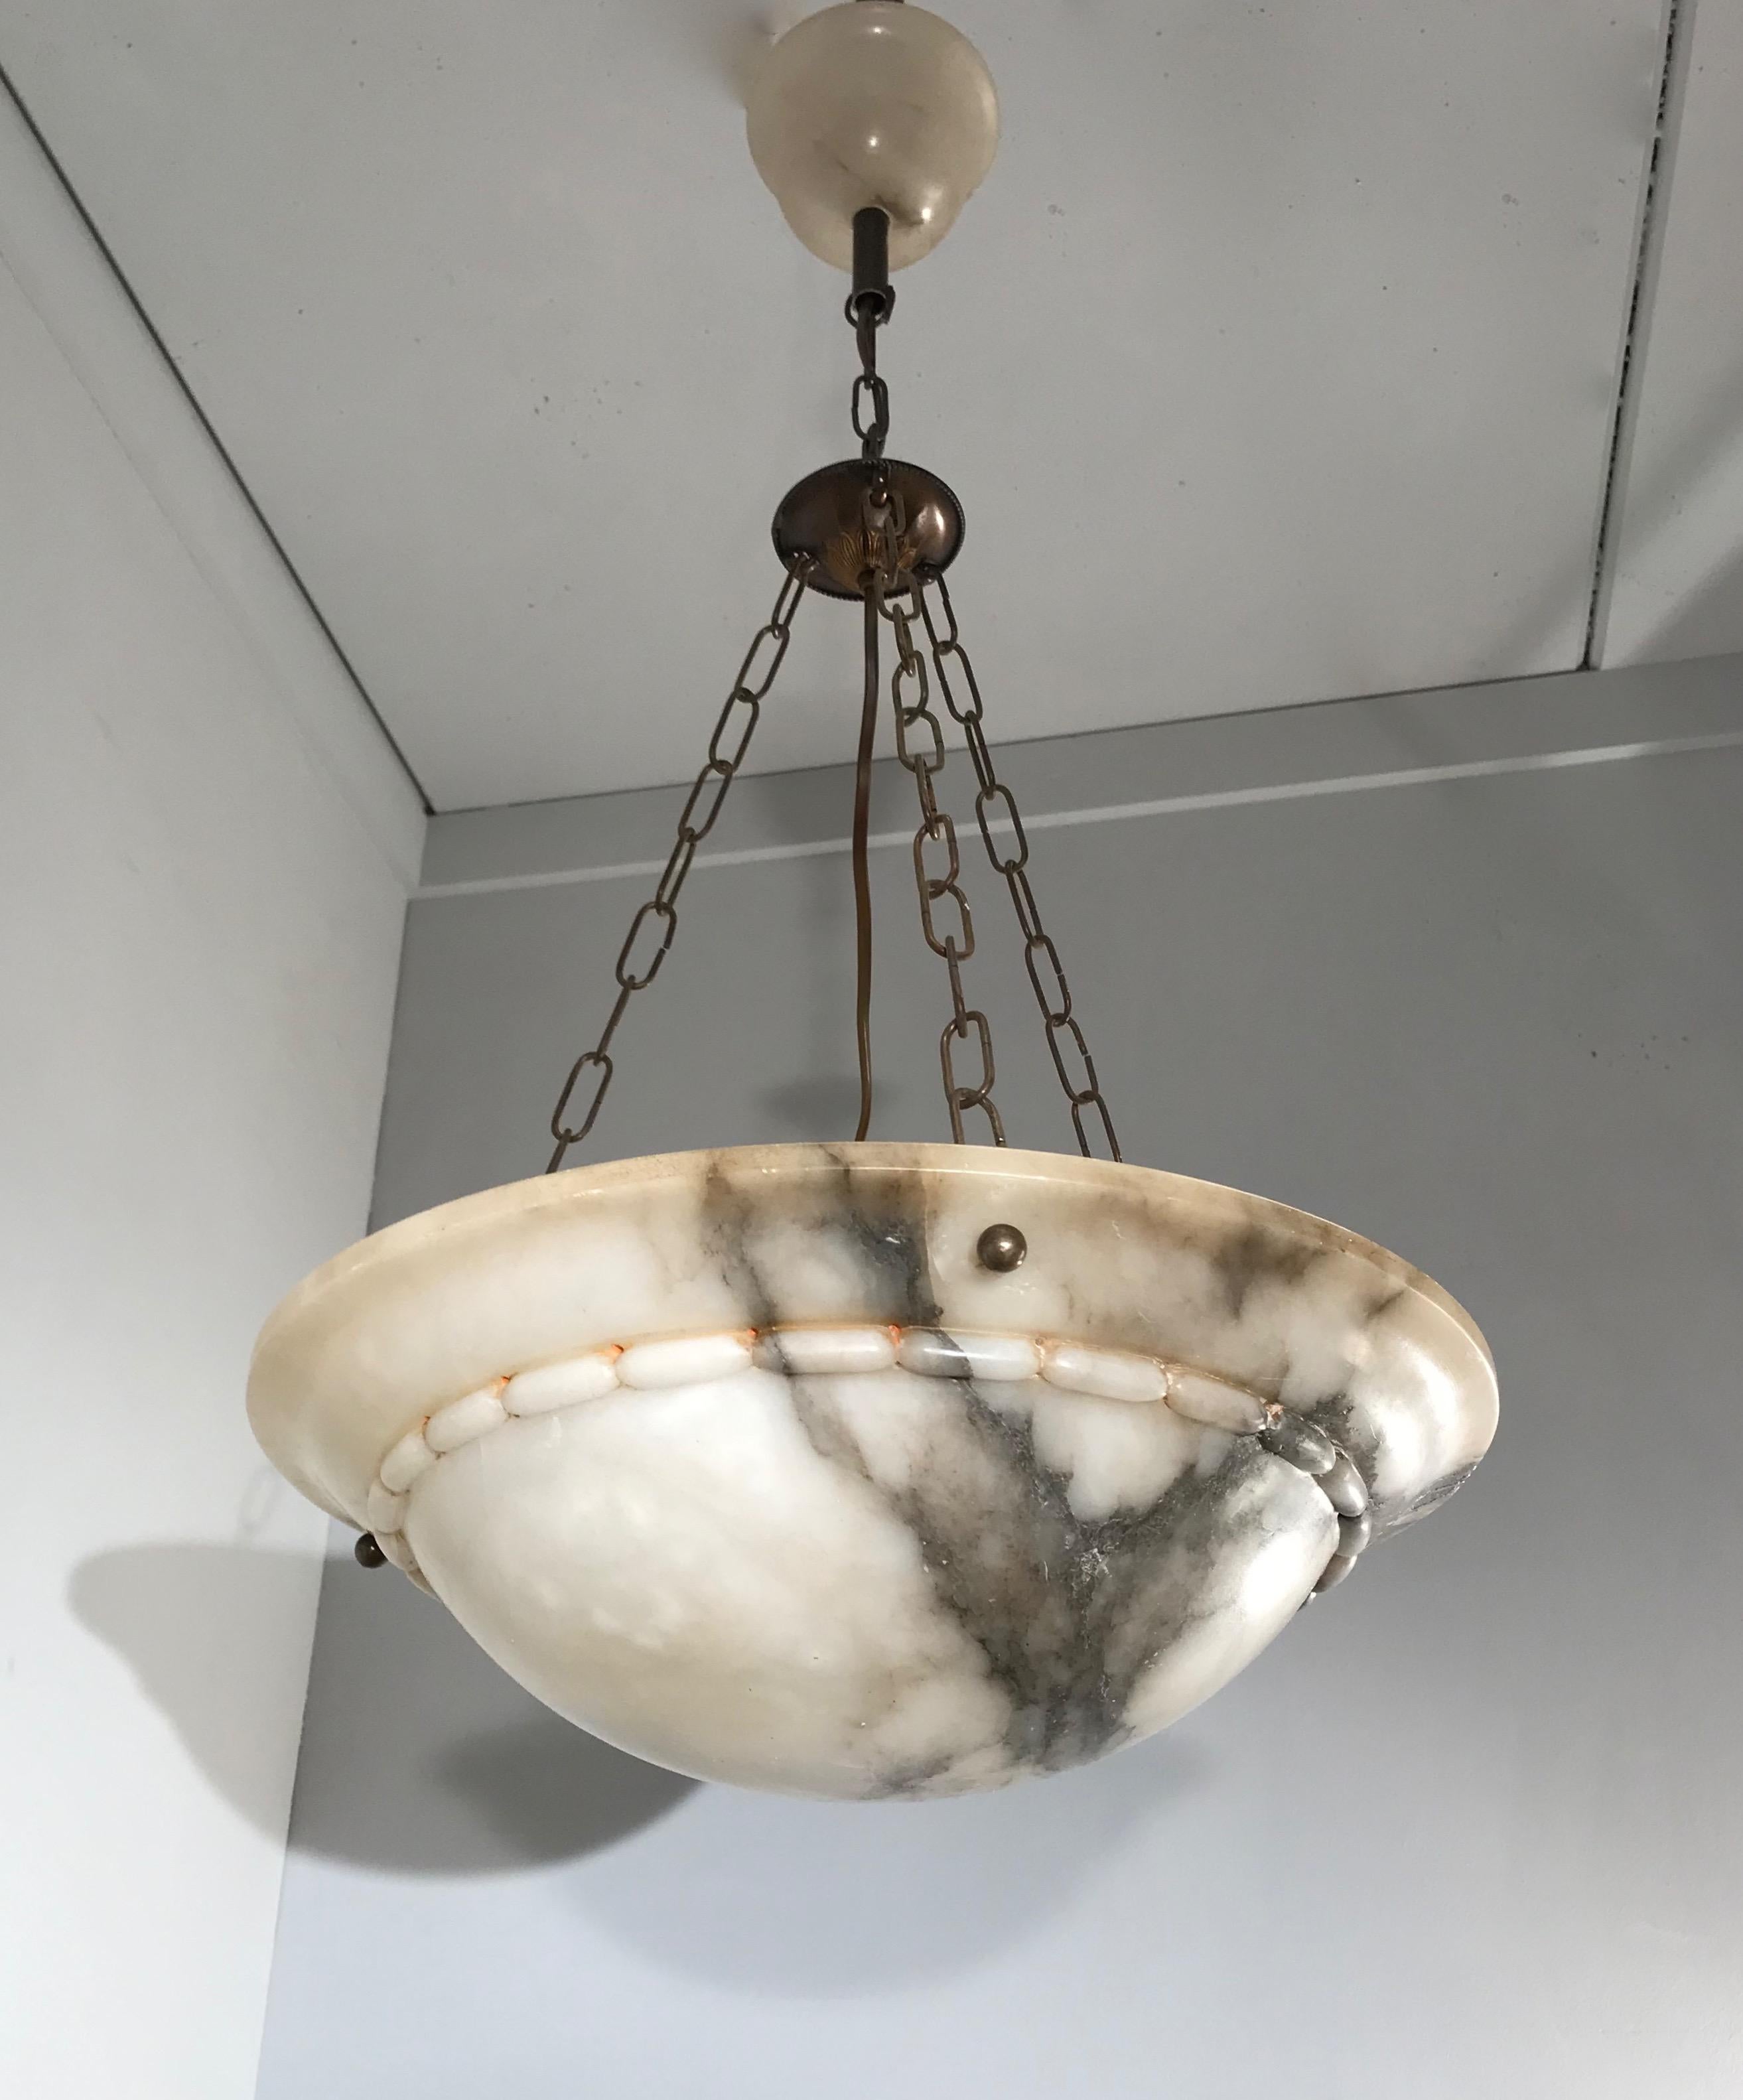 Italian Stunning Early 1900s Arts & Crafts White and Black Veins Alabaster Pendant Light